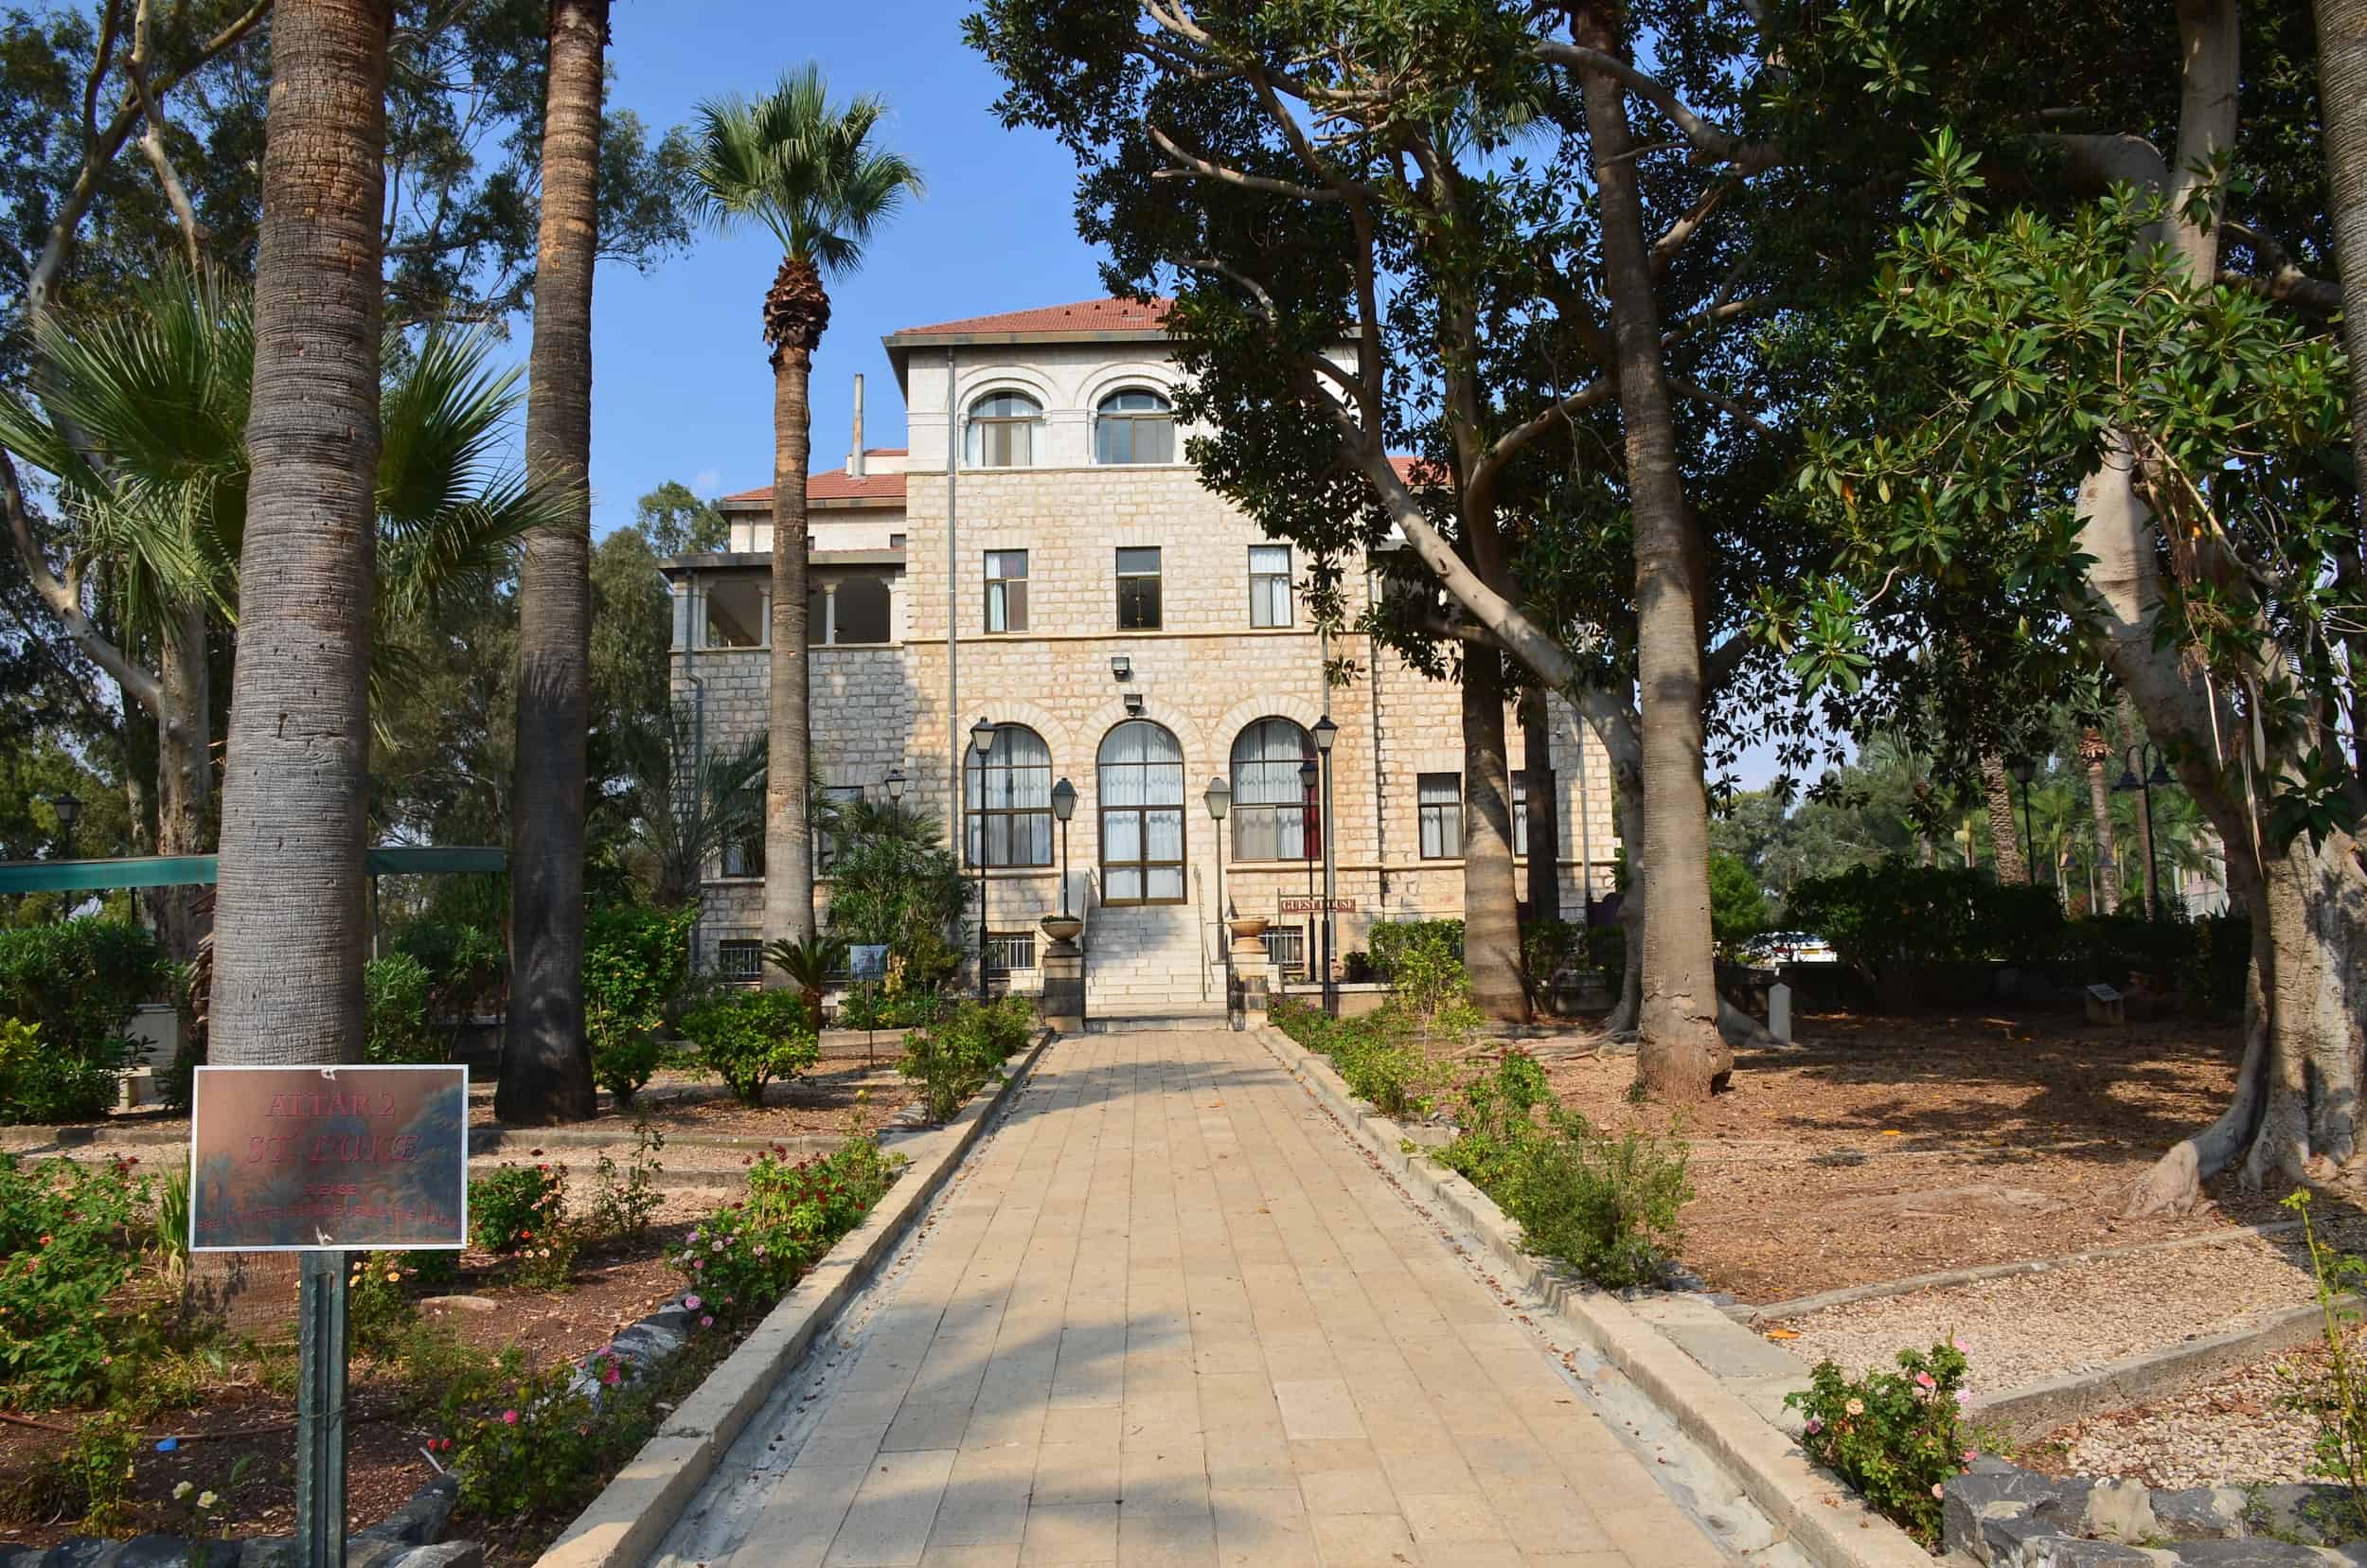 Old guesthouse on the Mount of Beatitudes in Israel